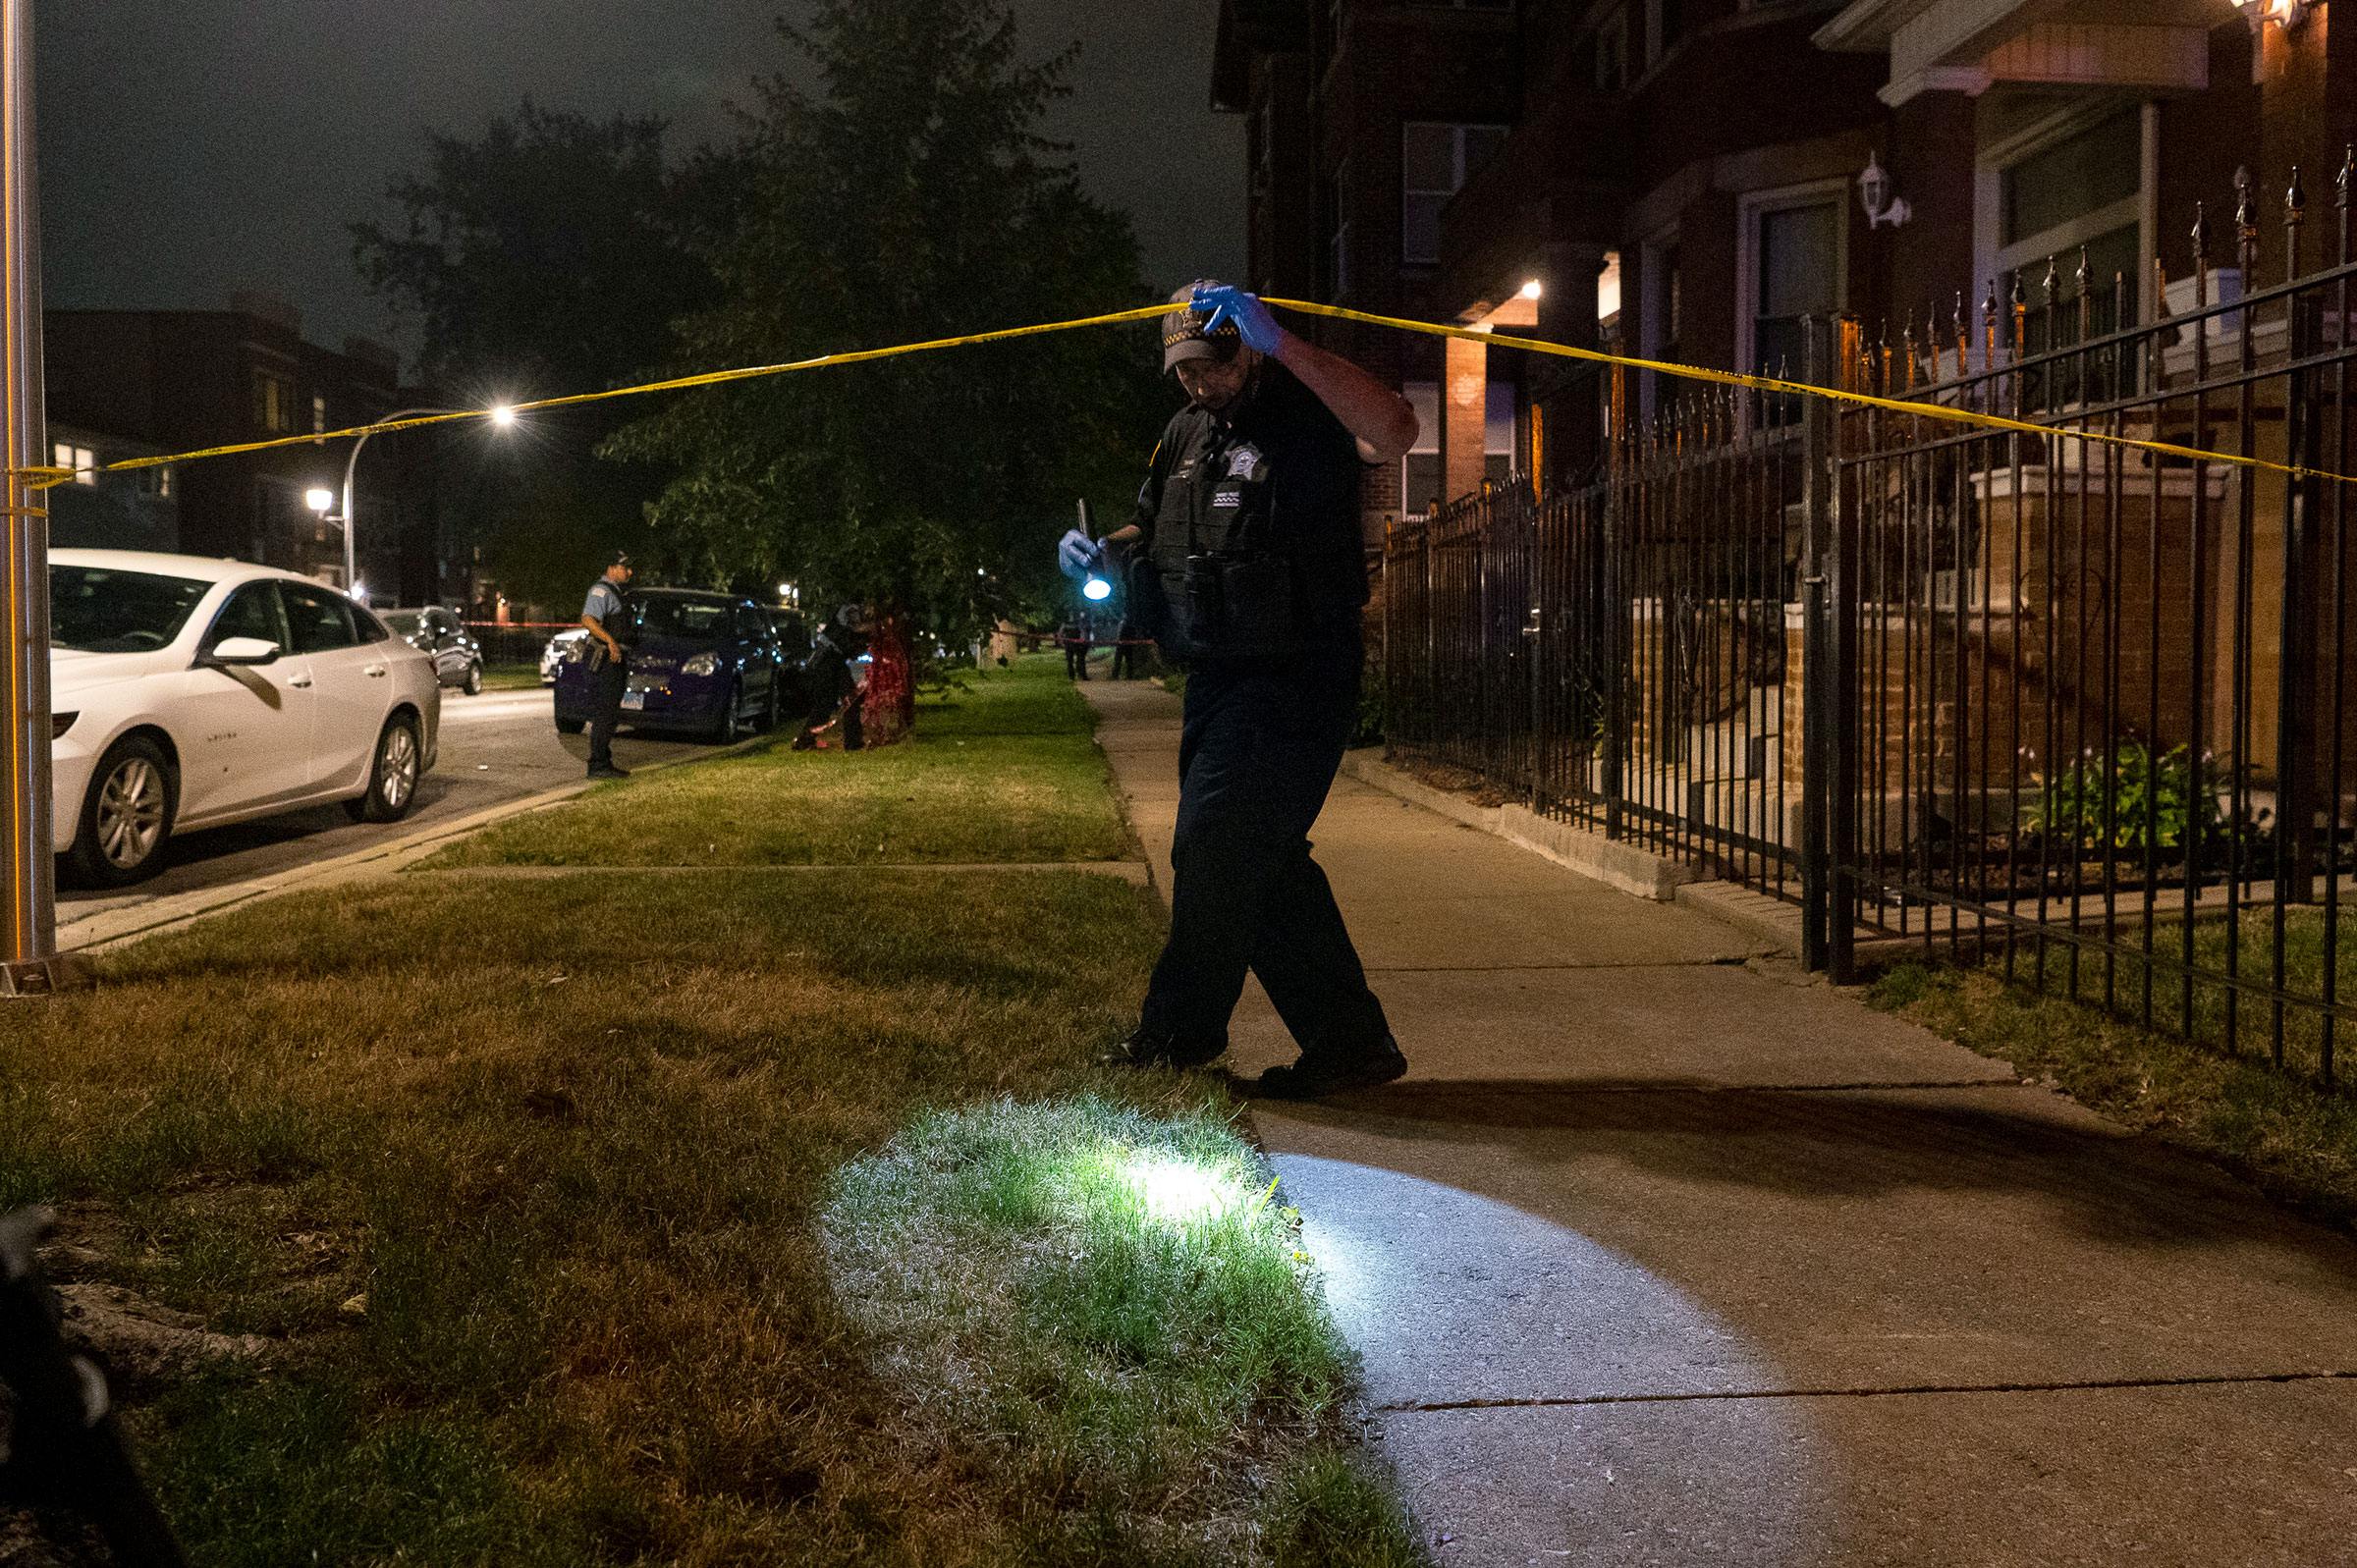 Chicago police at the scene of a shooting in the Woodlawn neighborhood of Chicago, Friday, Sept. 3, 2021. A 4-year-old boy was shot twice when bullets came through the front window of a home, Chicago Police said. (Tyler LaRiviere—Chicago Sun-Times/AP)